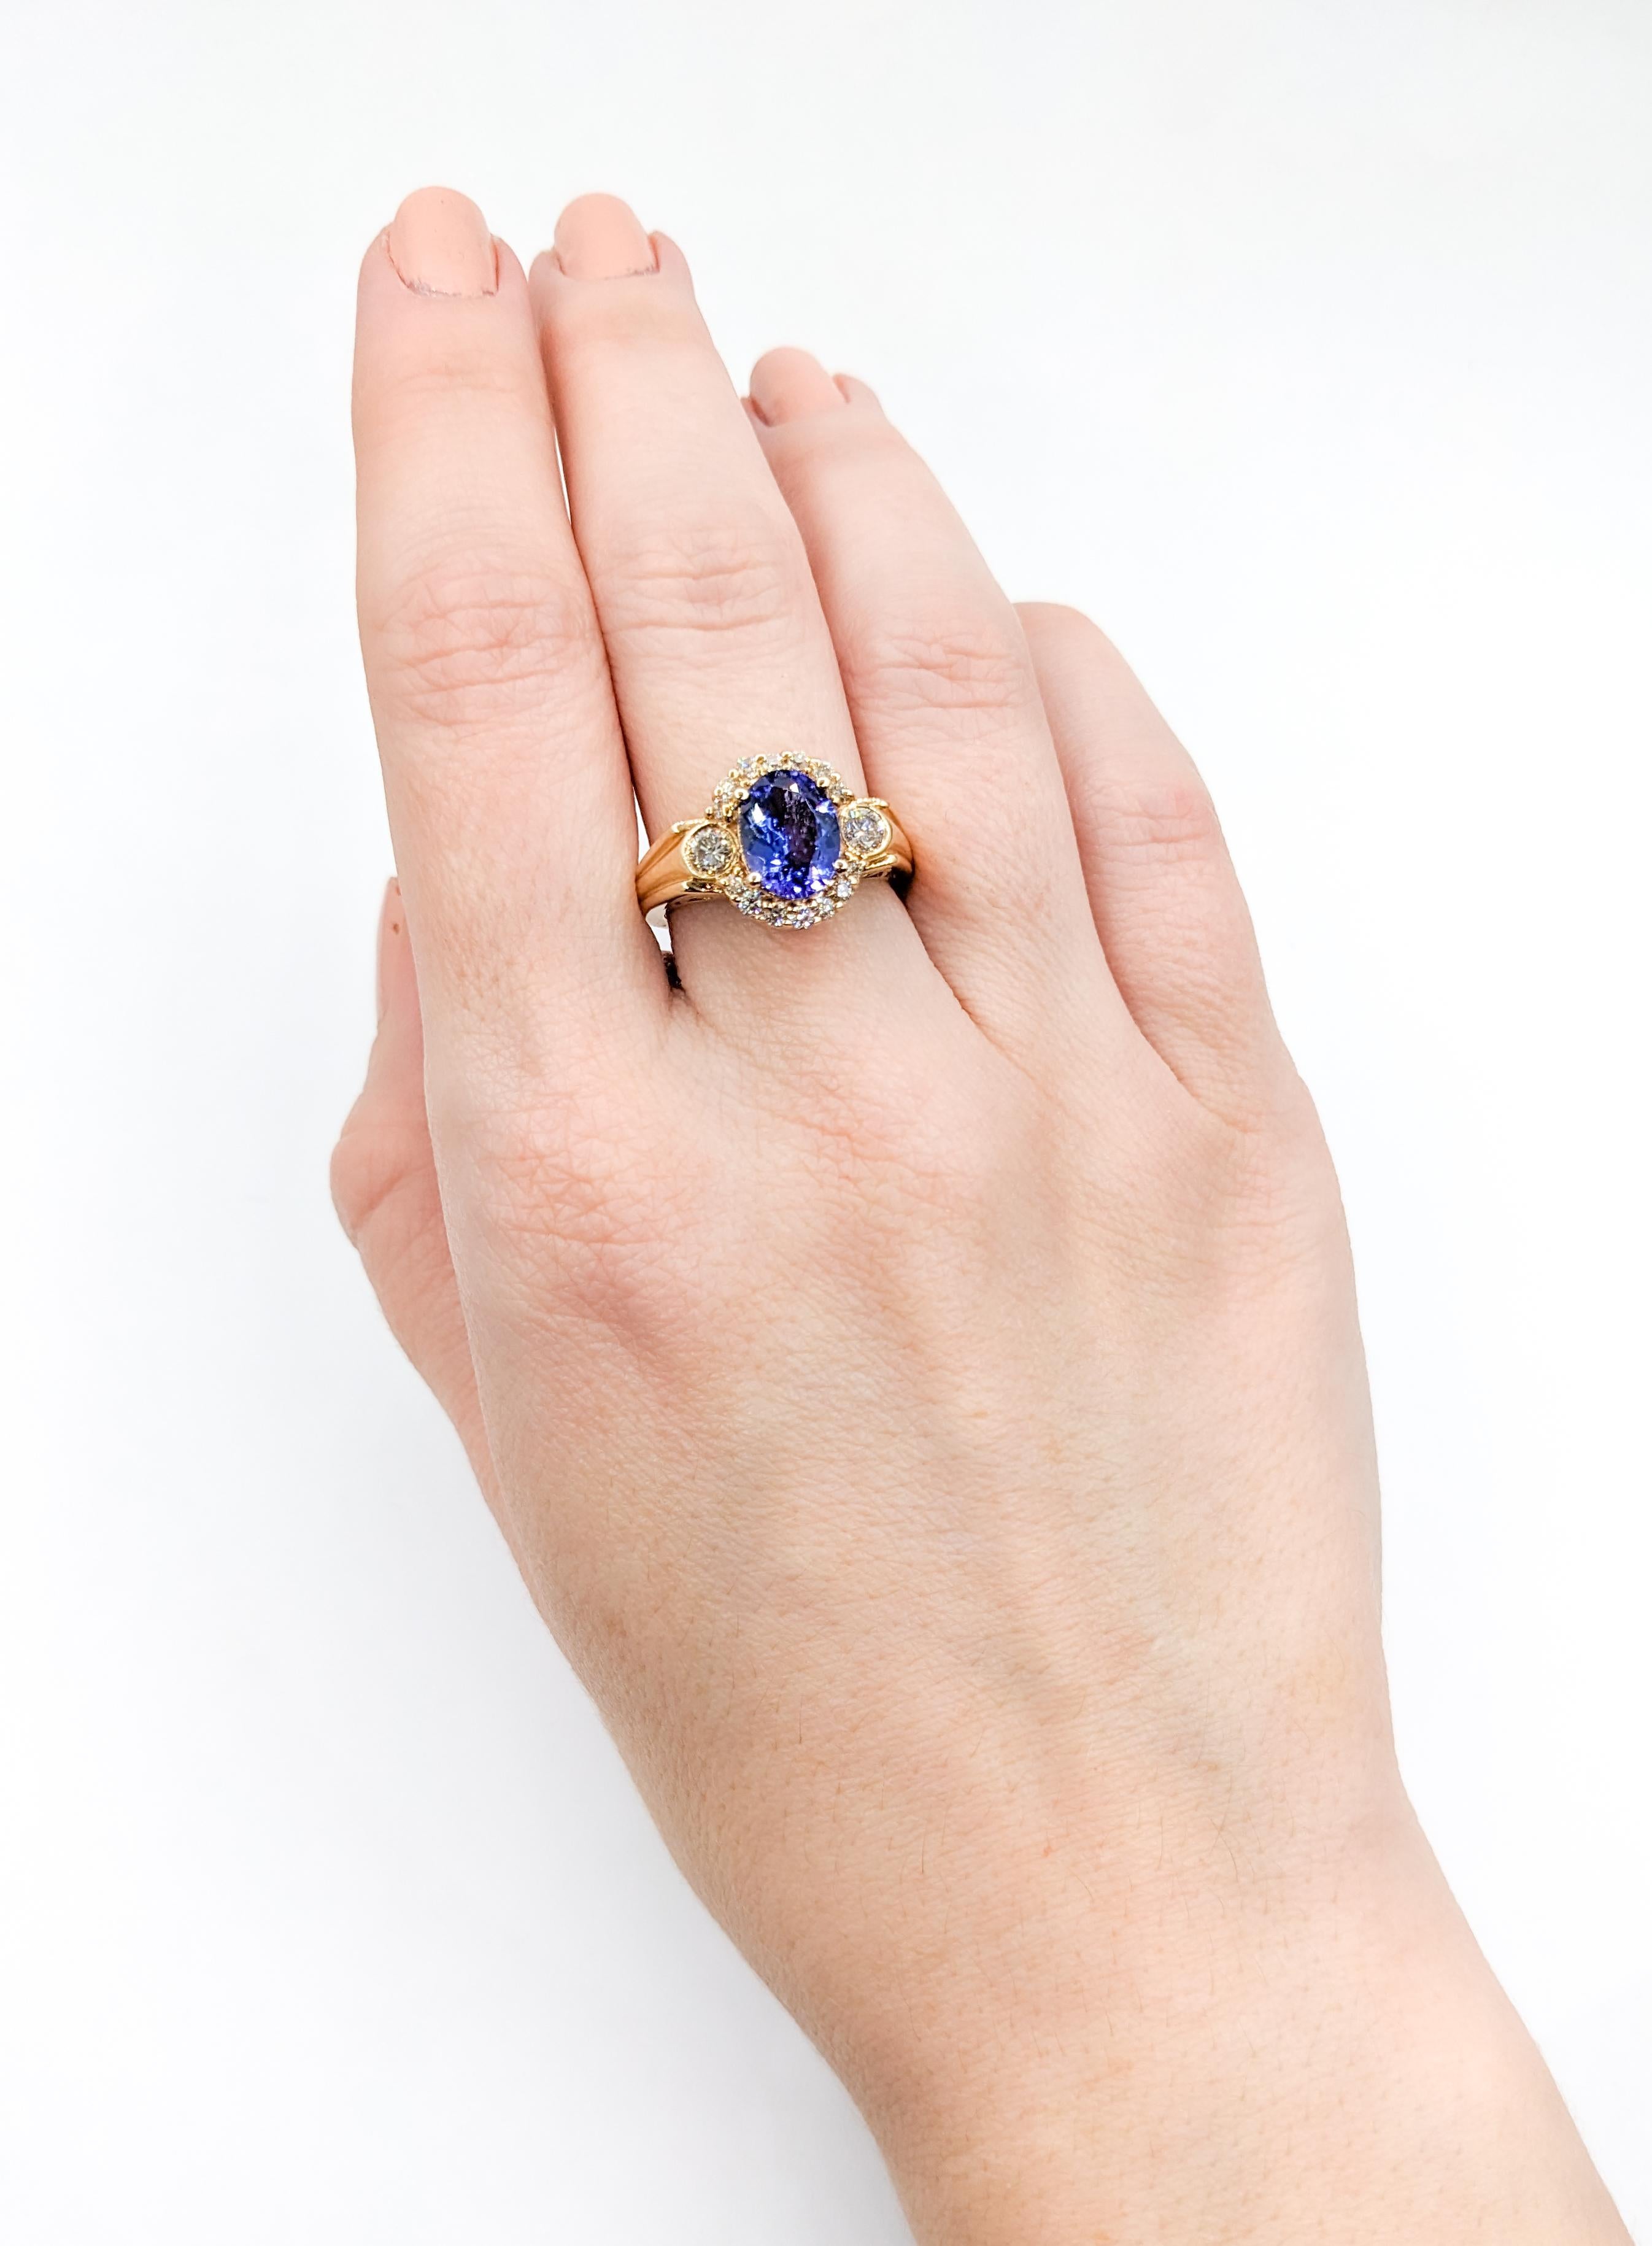 Indigo 1.76ct Oval Tanzanite & Diamond Cocktail Ring

Introducing this striking Tanzanite ring is expertly fashioned in 14k yellow gold. This piece showcases a lovely 1.76ct oval Tanzanite Gemstone at its heart. Complimenting the Blue-Purple of the